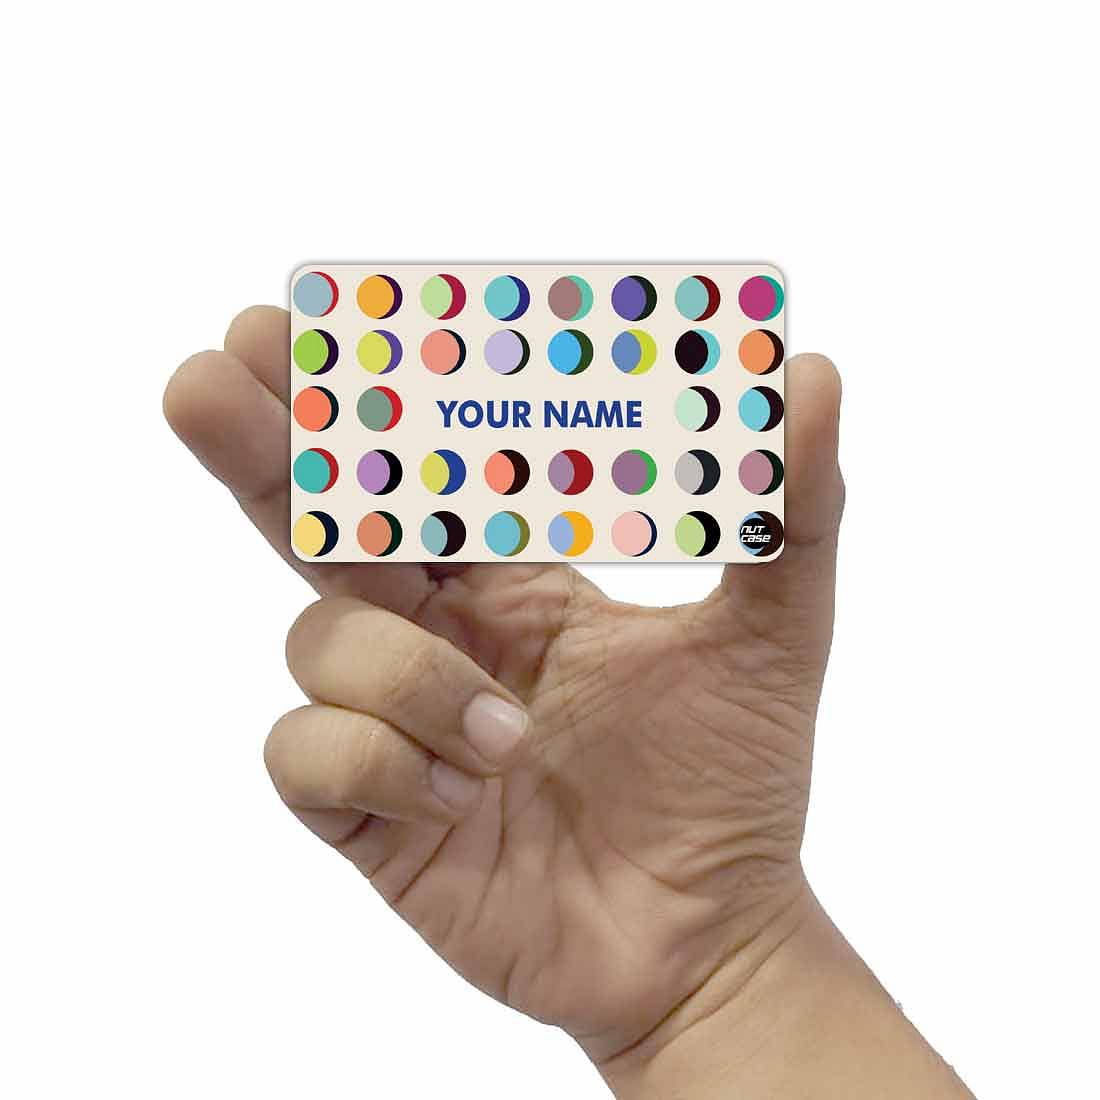 Personalized NFC Smart Card -  Painting Colors Nutcase